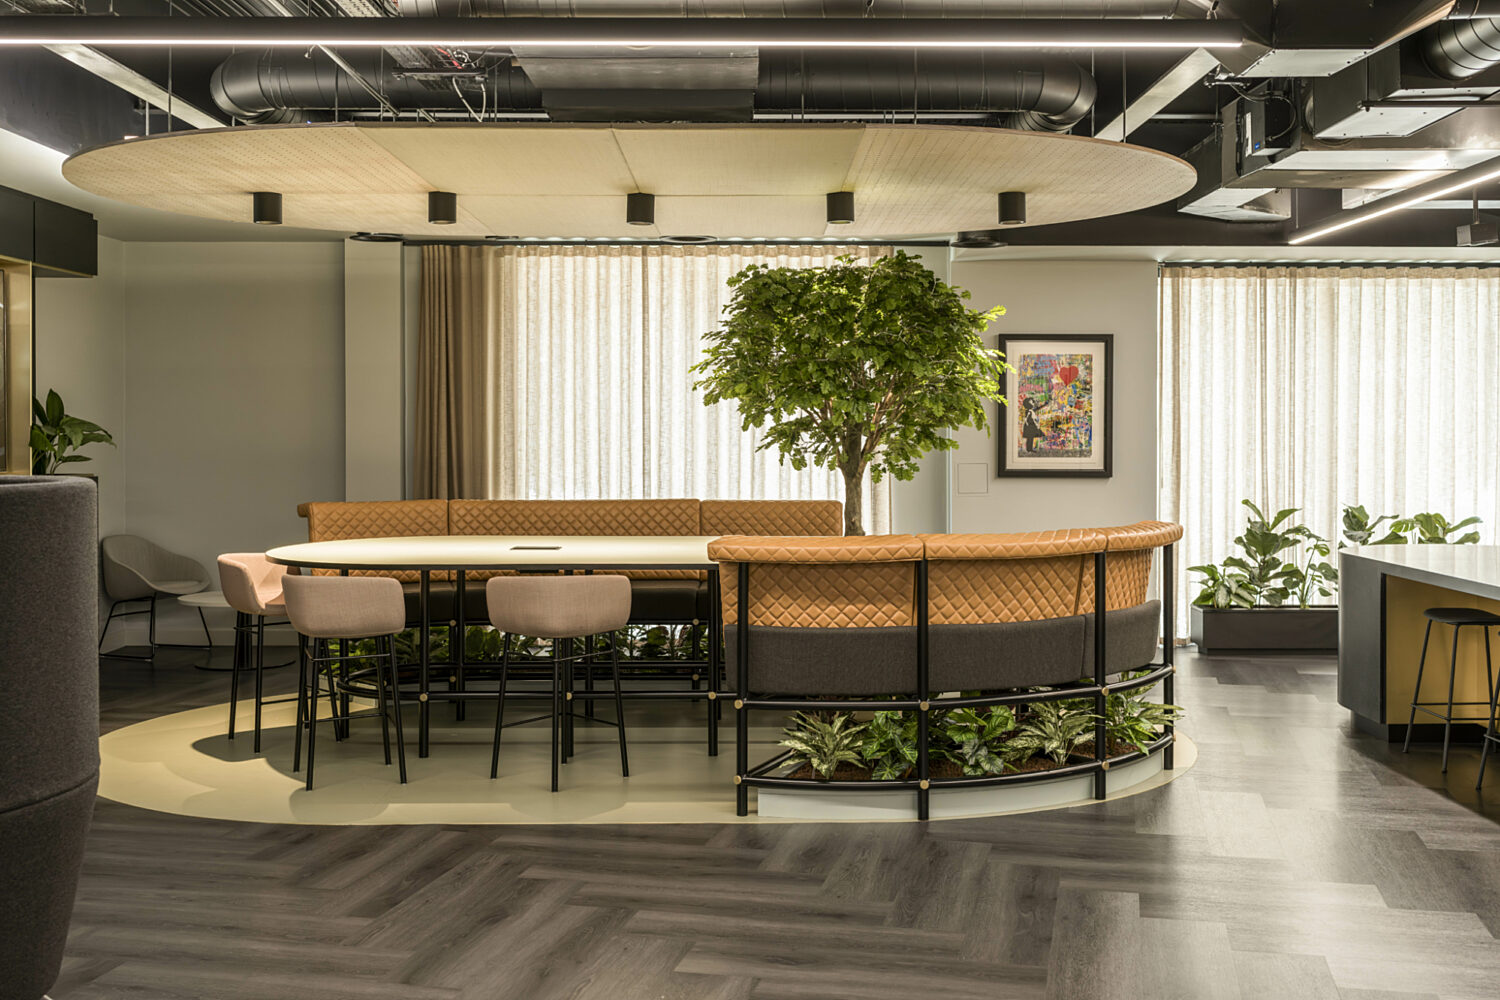 Textured collaborative workspace in Leeds office with biophilia